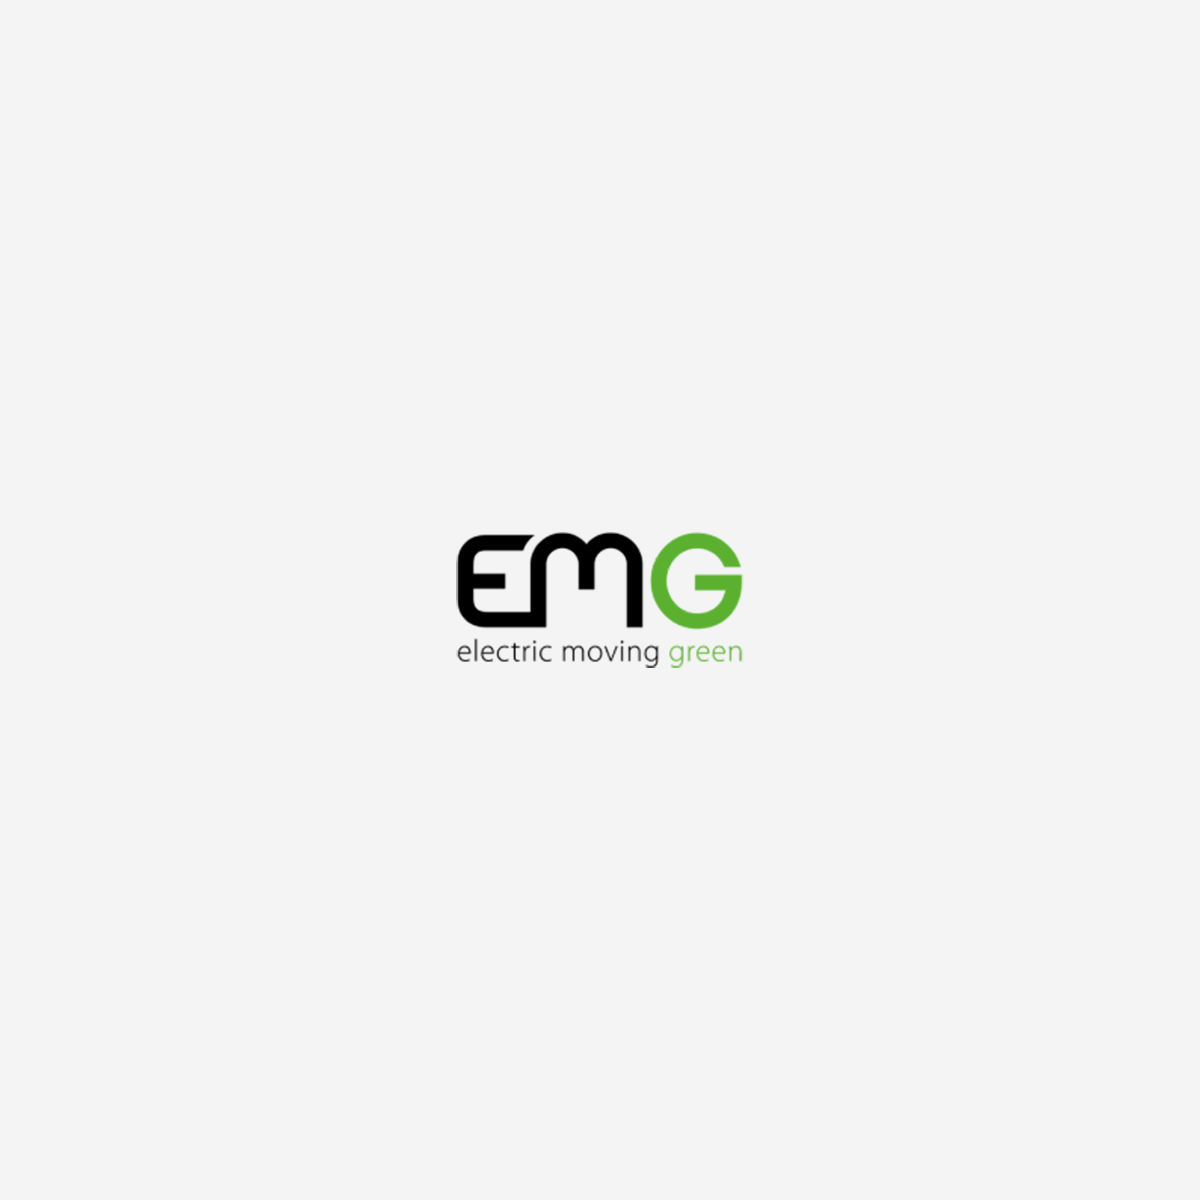 EMG Mobility Store